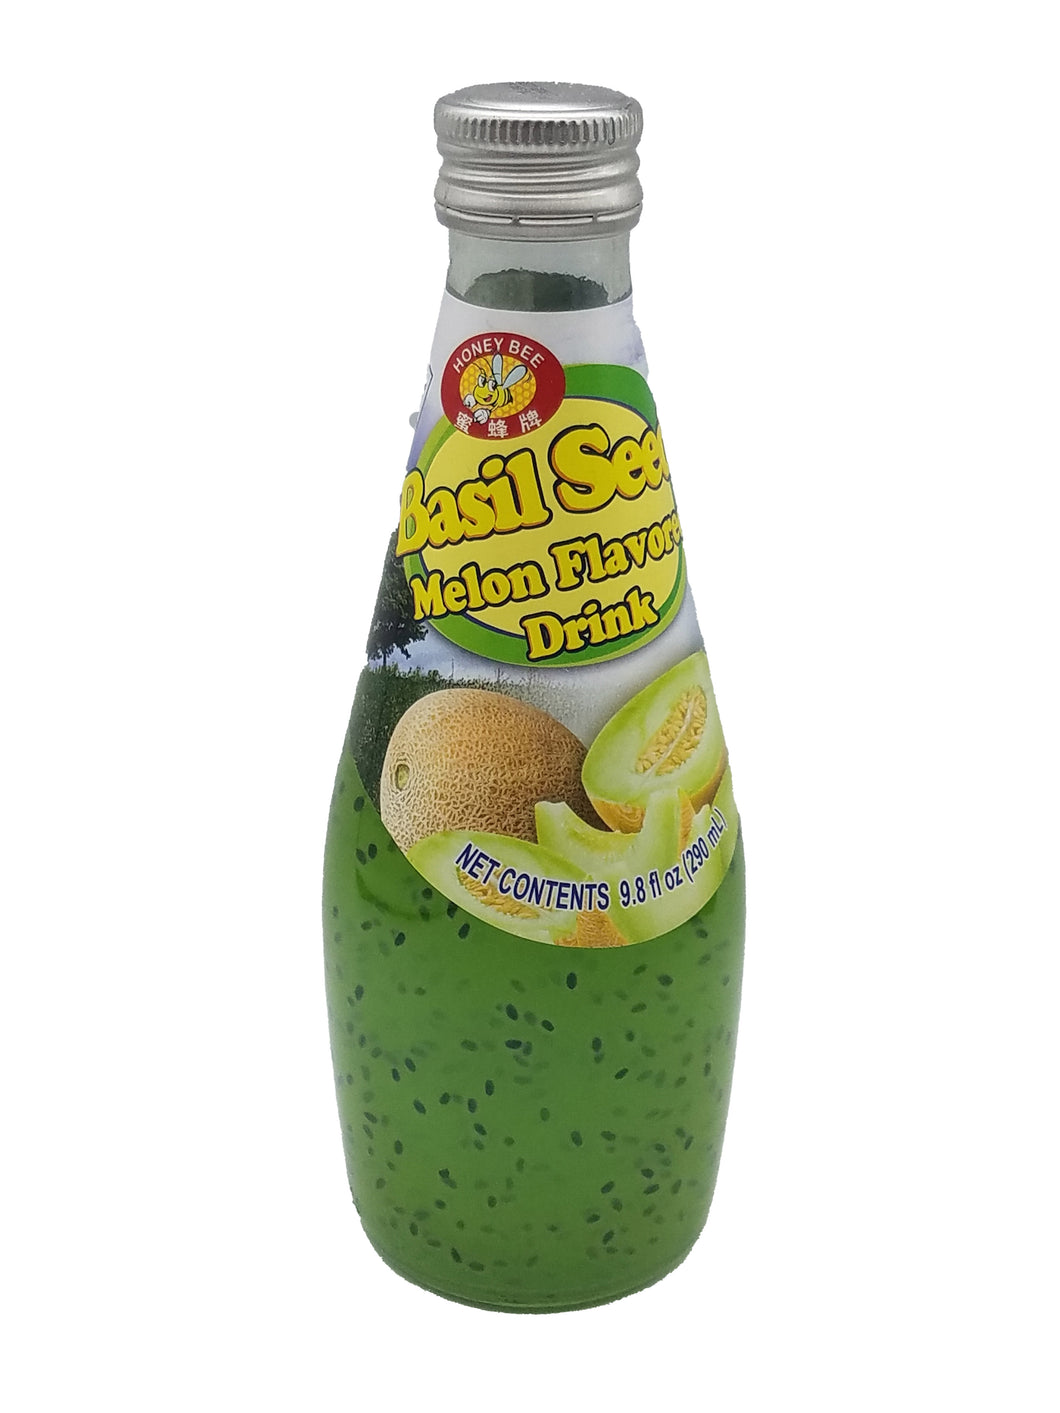 Honey Bee Basil Seed Melon Flavored Drink